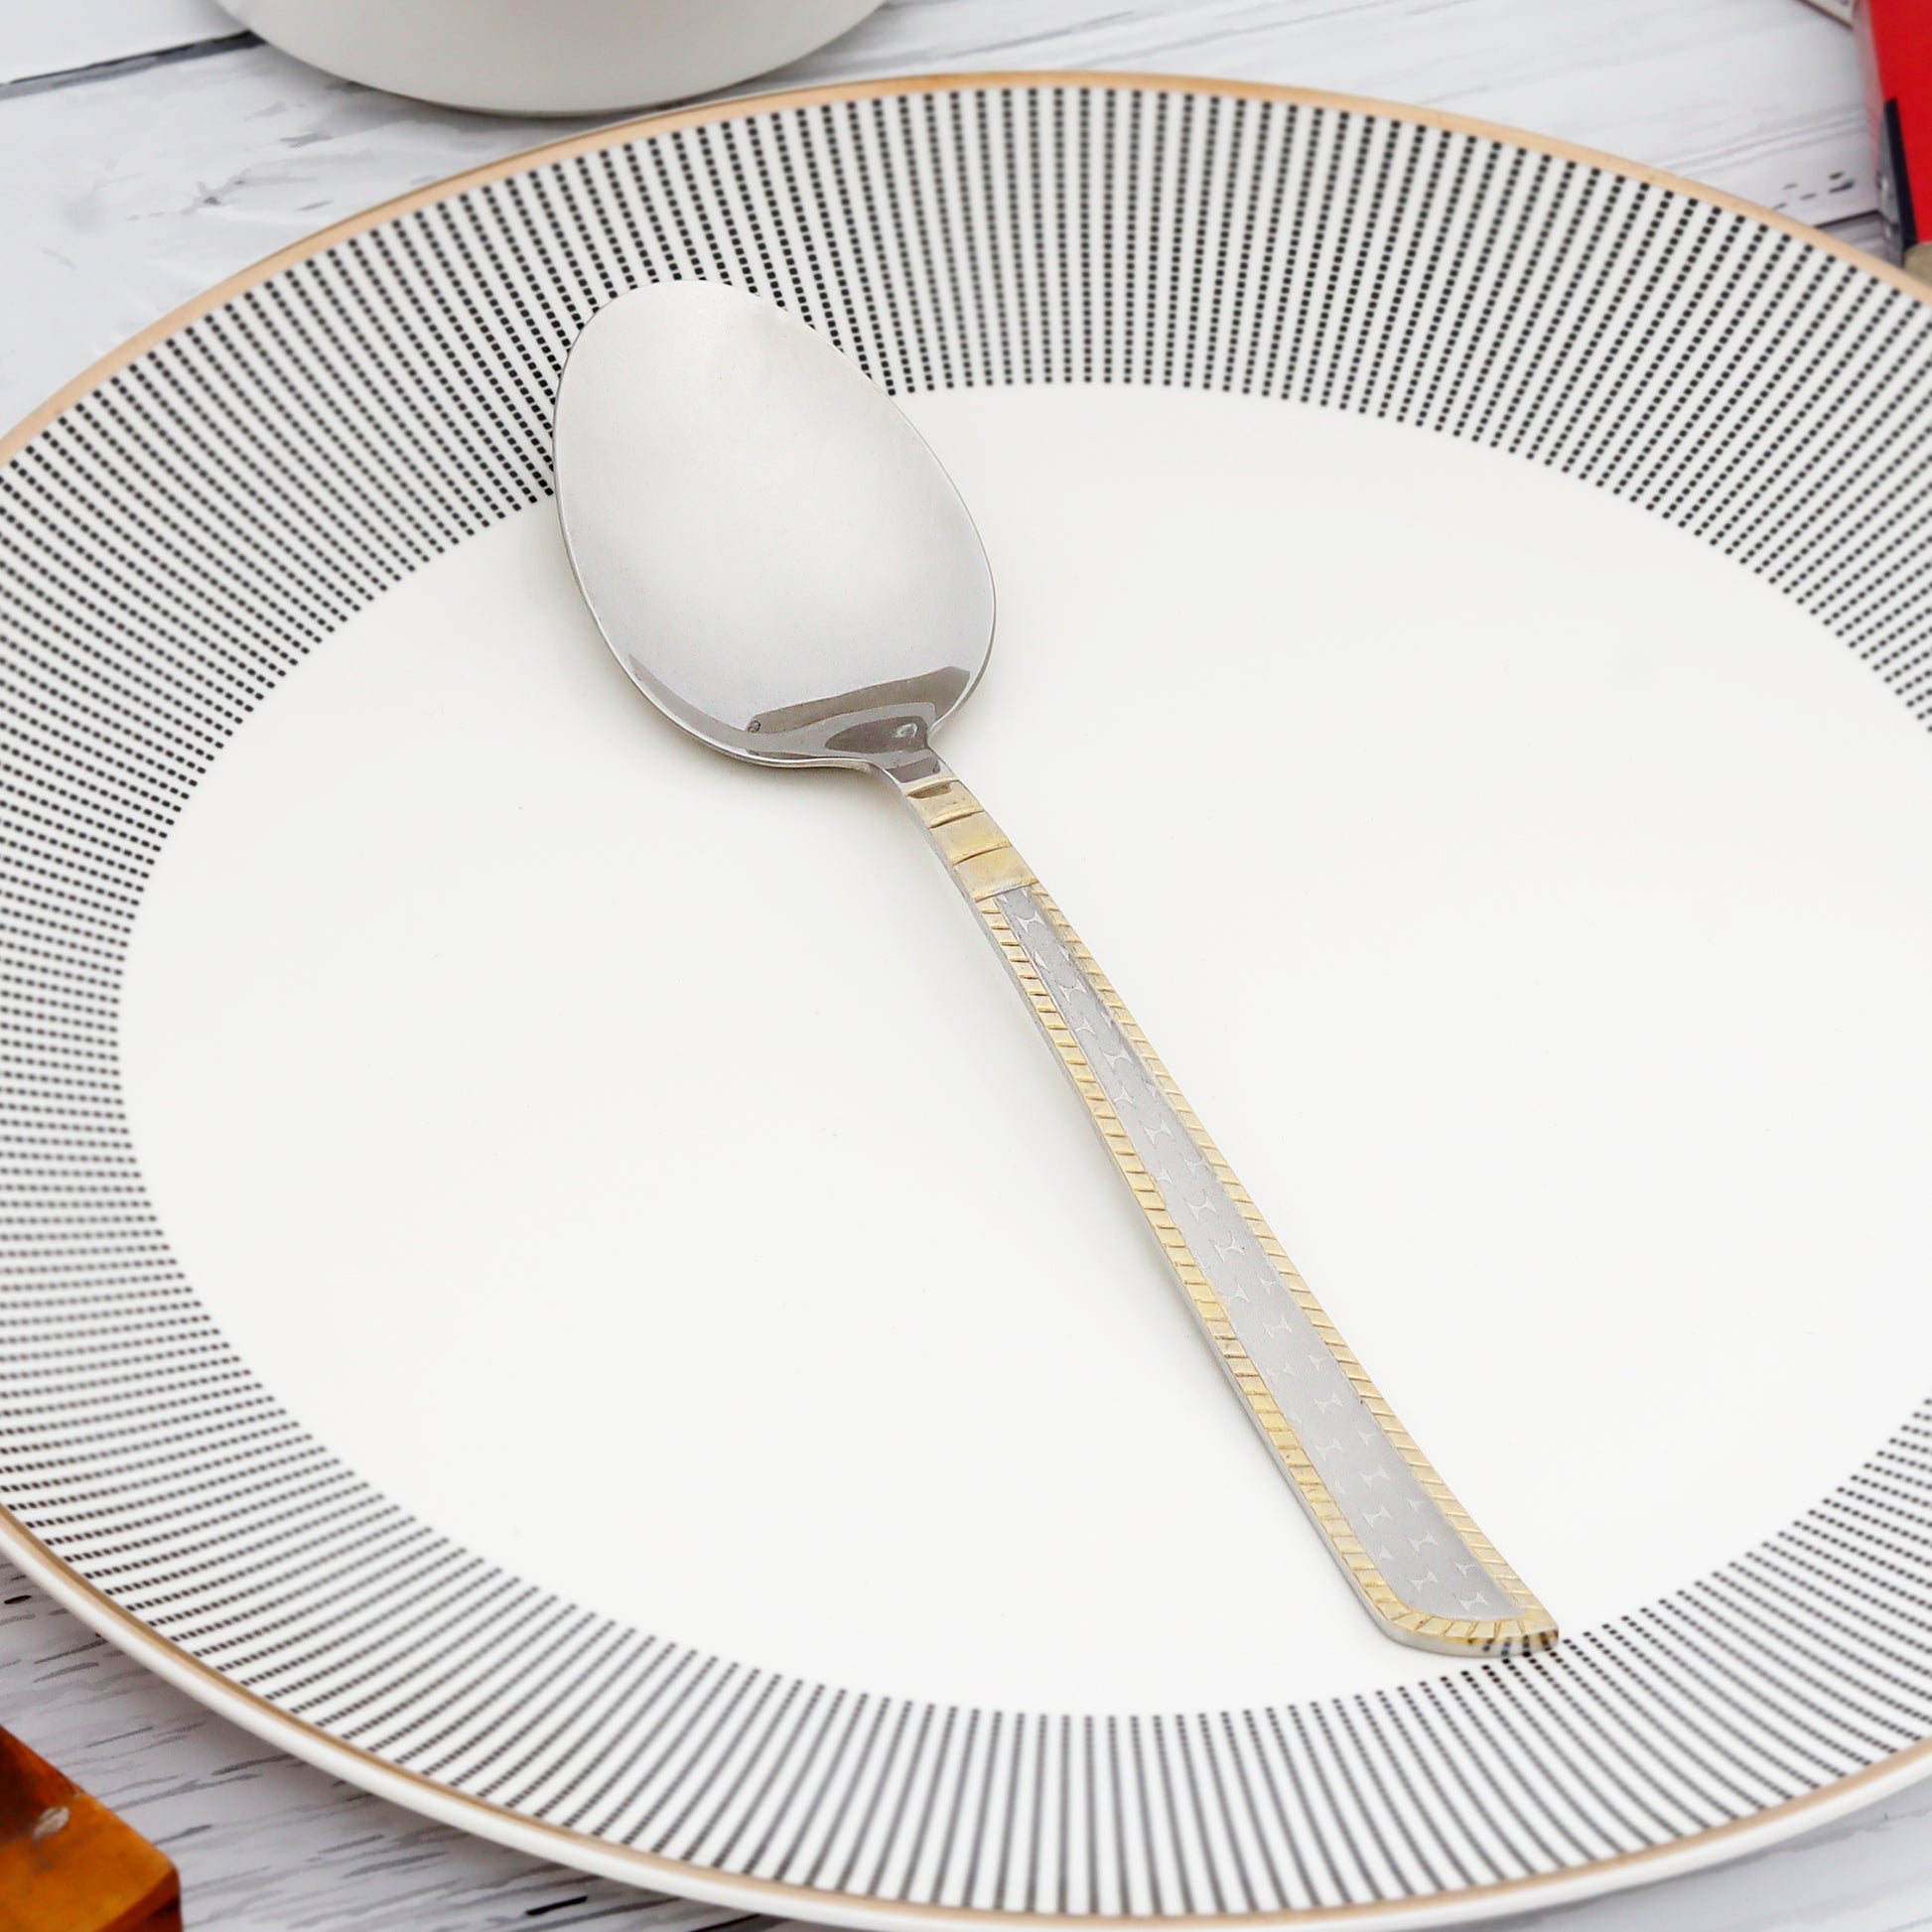 Elegant cutlery table spoon set by Swasha - redefine dining with timeless style